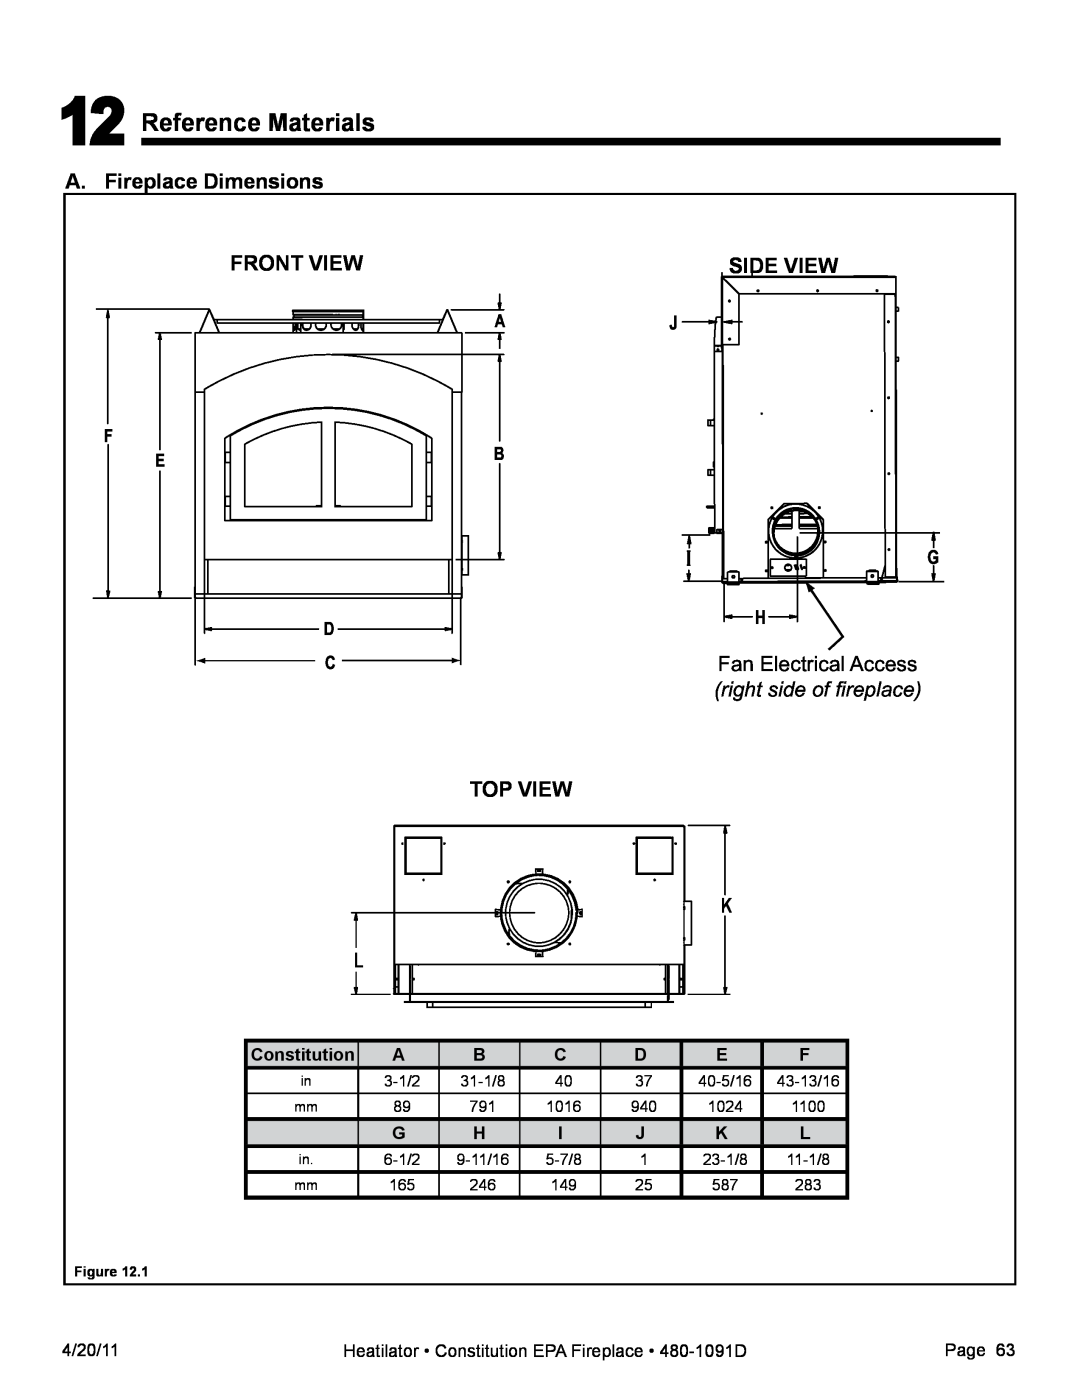 Heatiator C40 Reference Materials, A. Fireplace Dimensions, Front View, Side View, right side of fireplace, Top View 